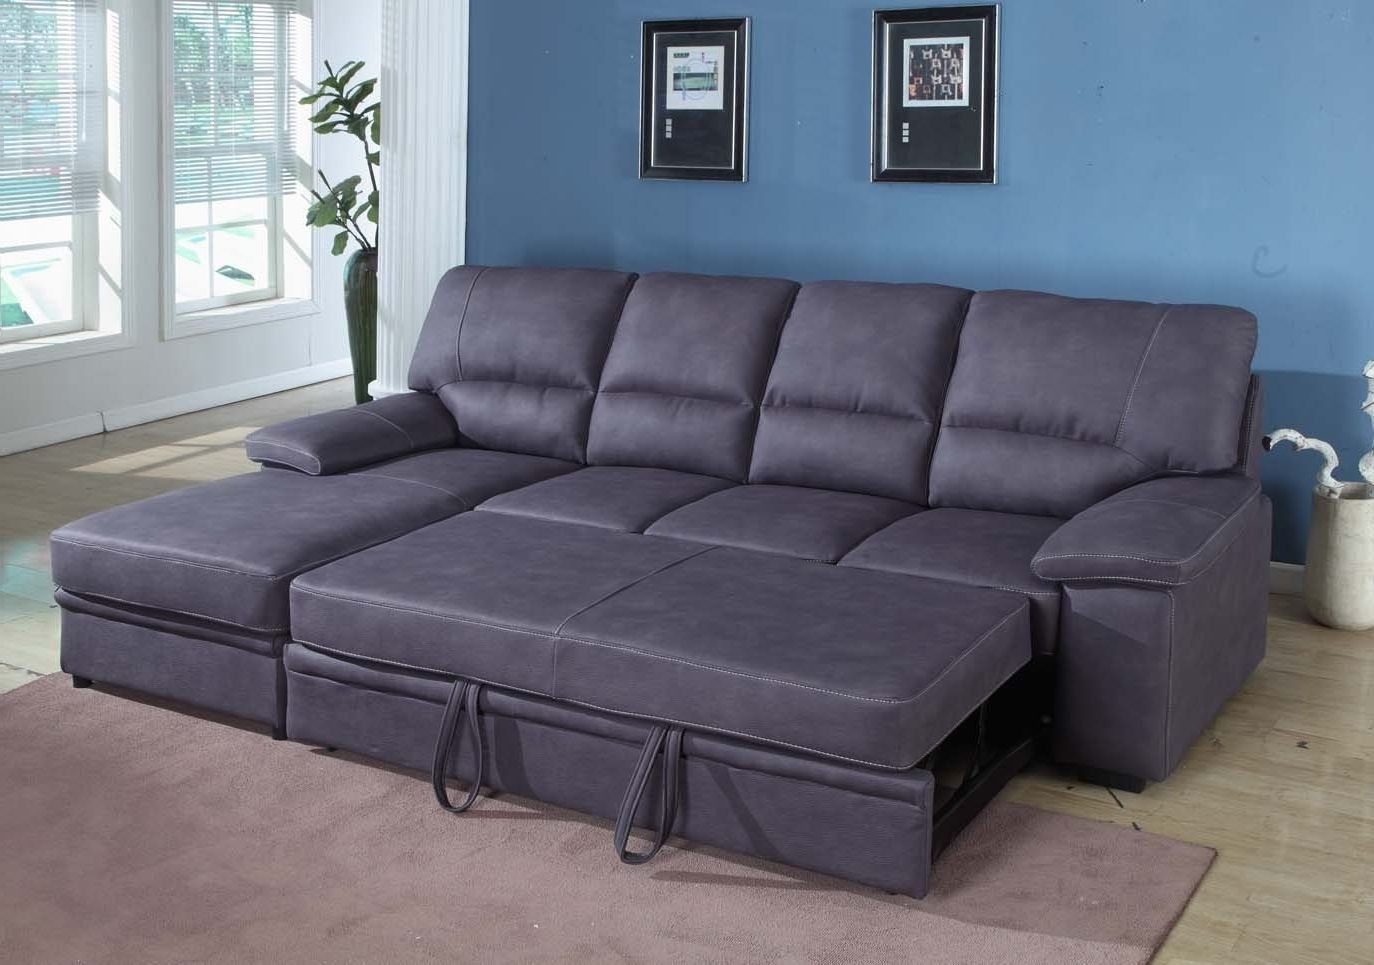 Brilliant Sectional Sleeper Sofa With Chaise Cool Living Room Throughout Favorite Chaise Sleepers (View 9 of 15)